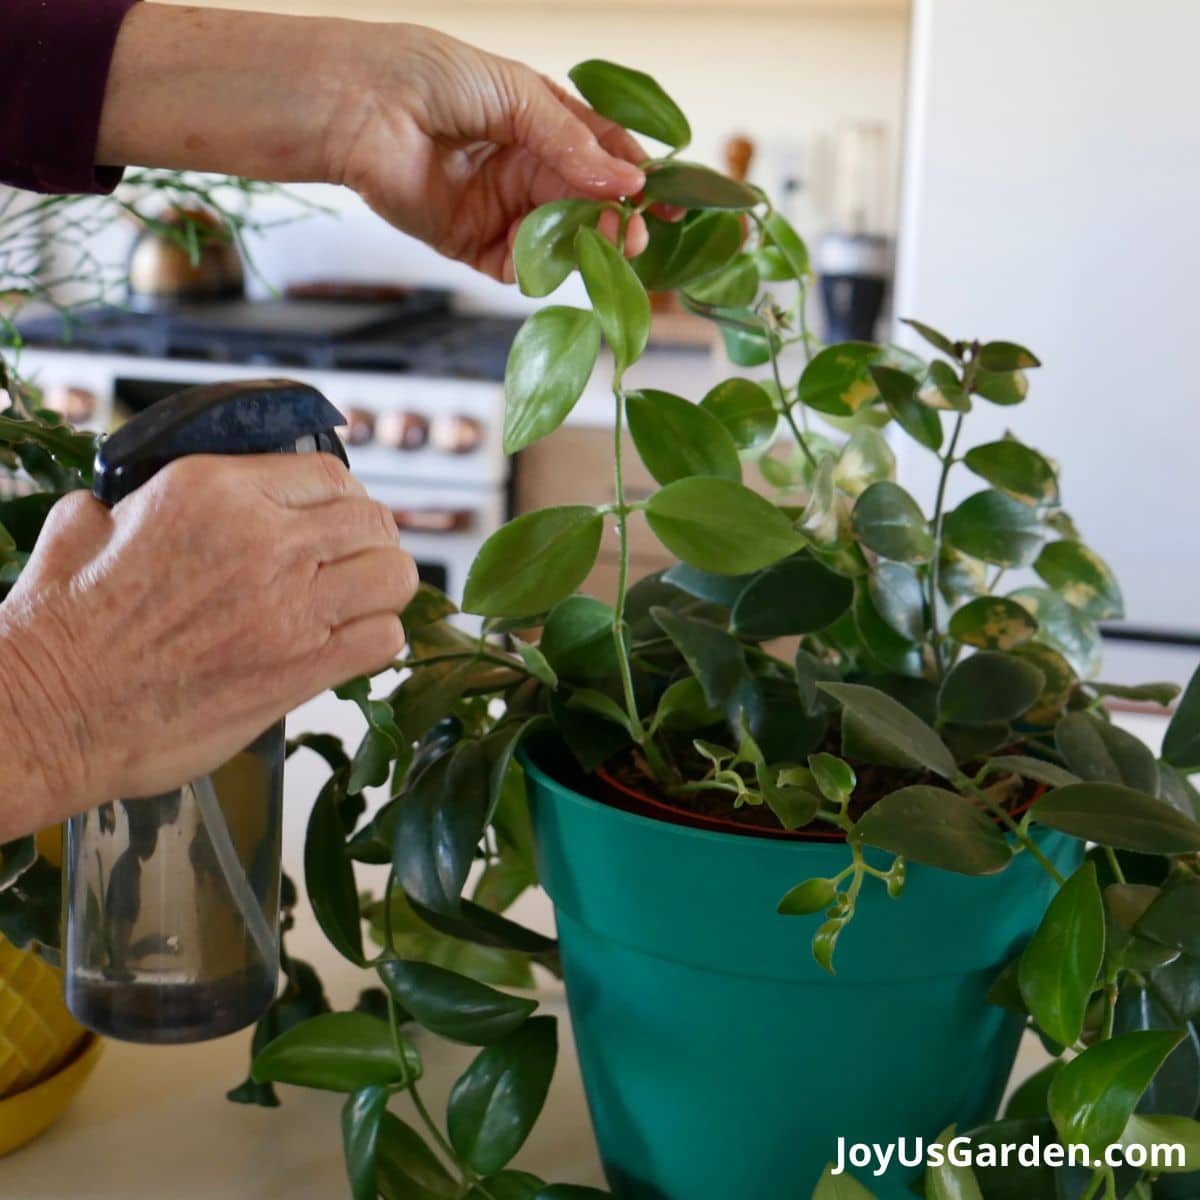 nell foster shown using a spray bottle to treat mealybugs on lipstick plant